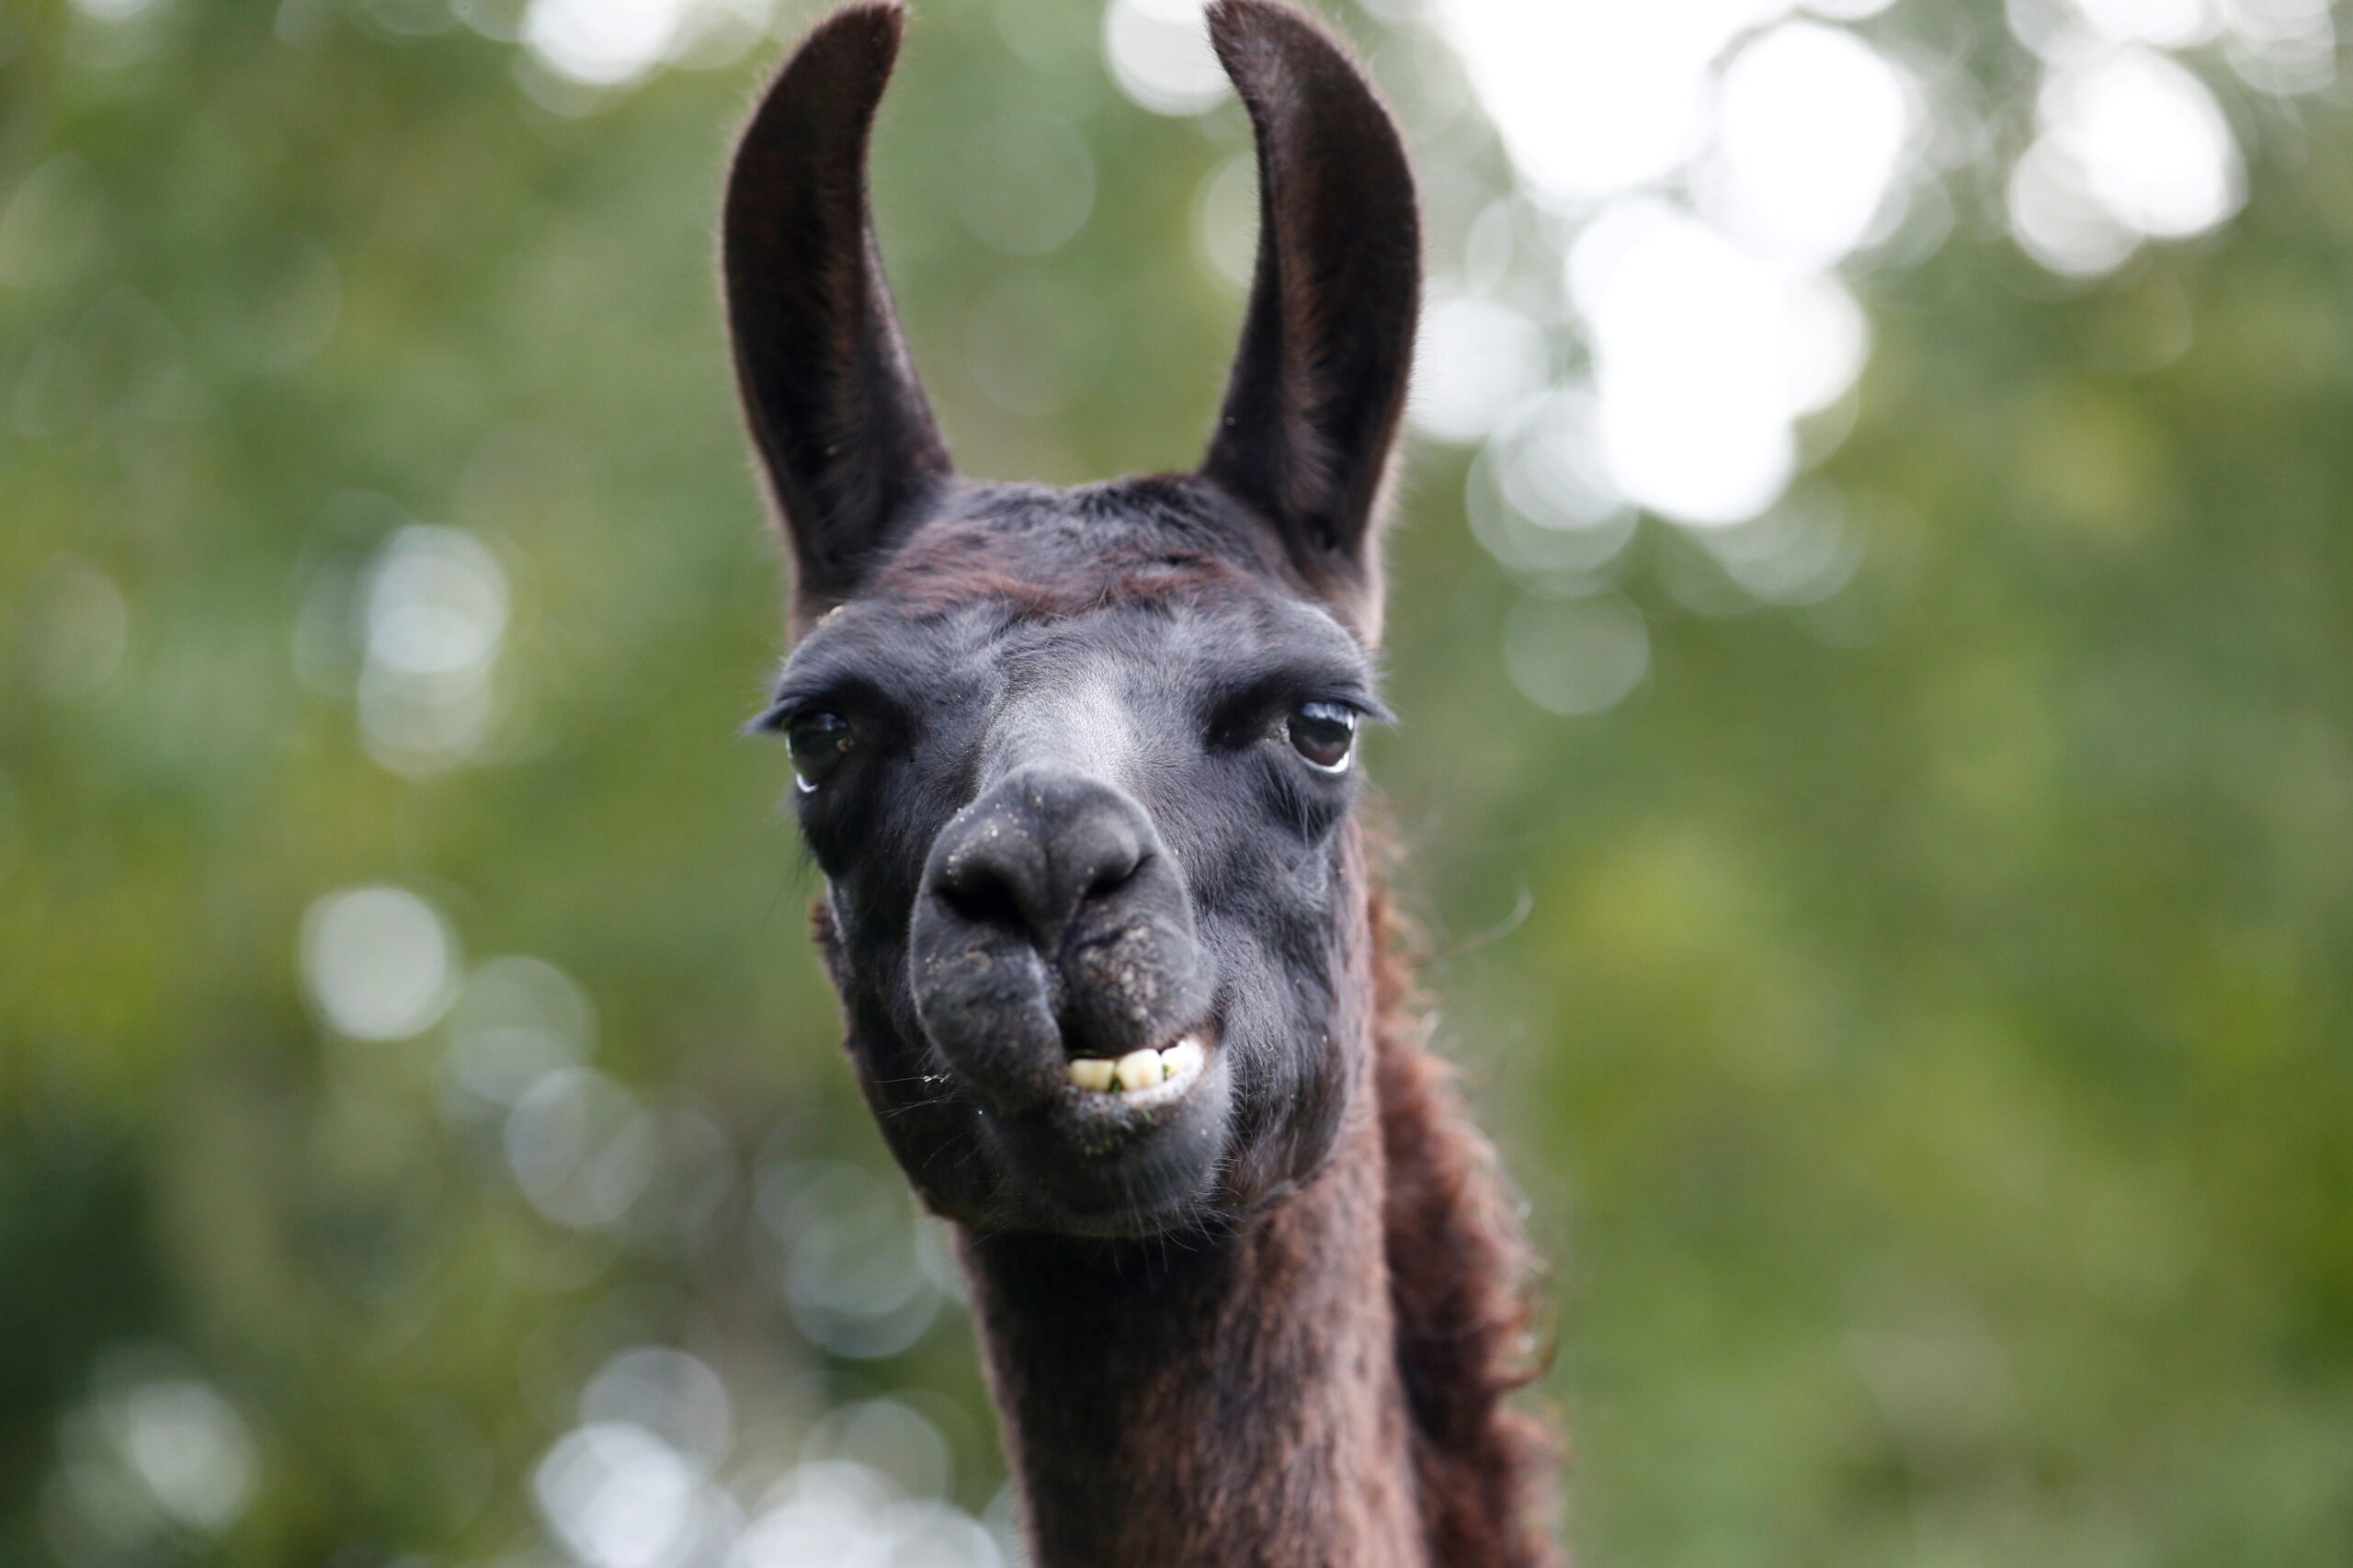 Llama Antibodies Might Be 'Game Changer' In Fight Against COVID-19, Belgians Say